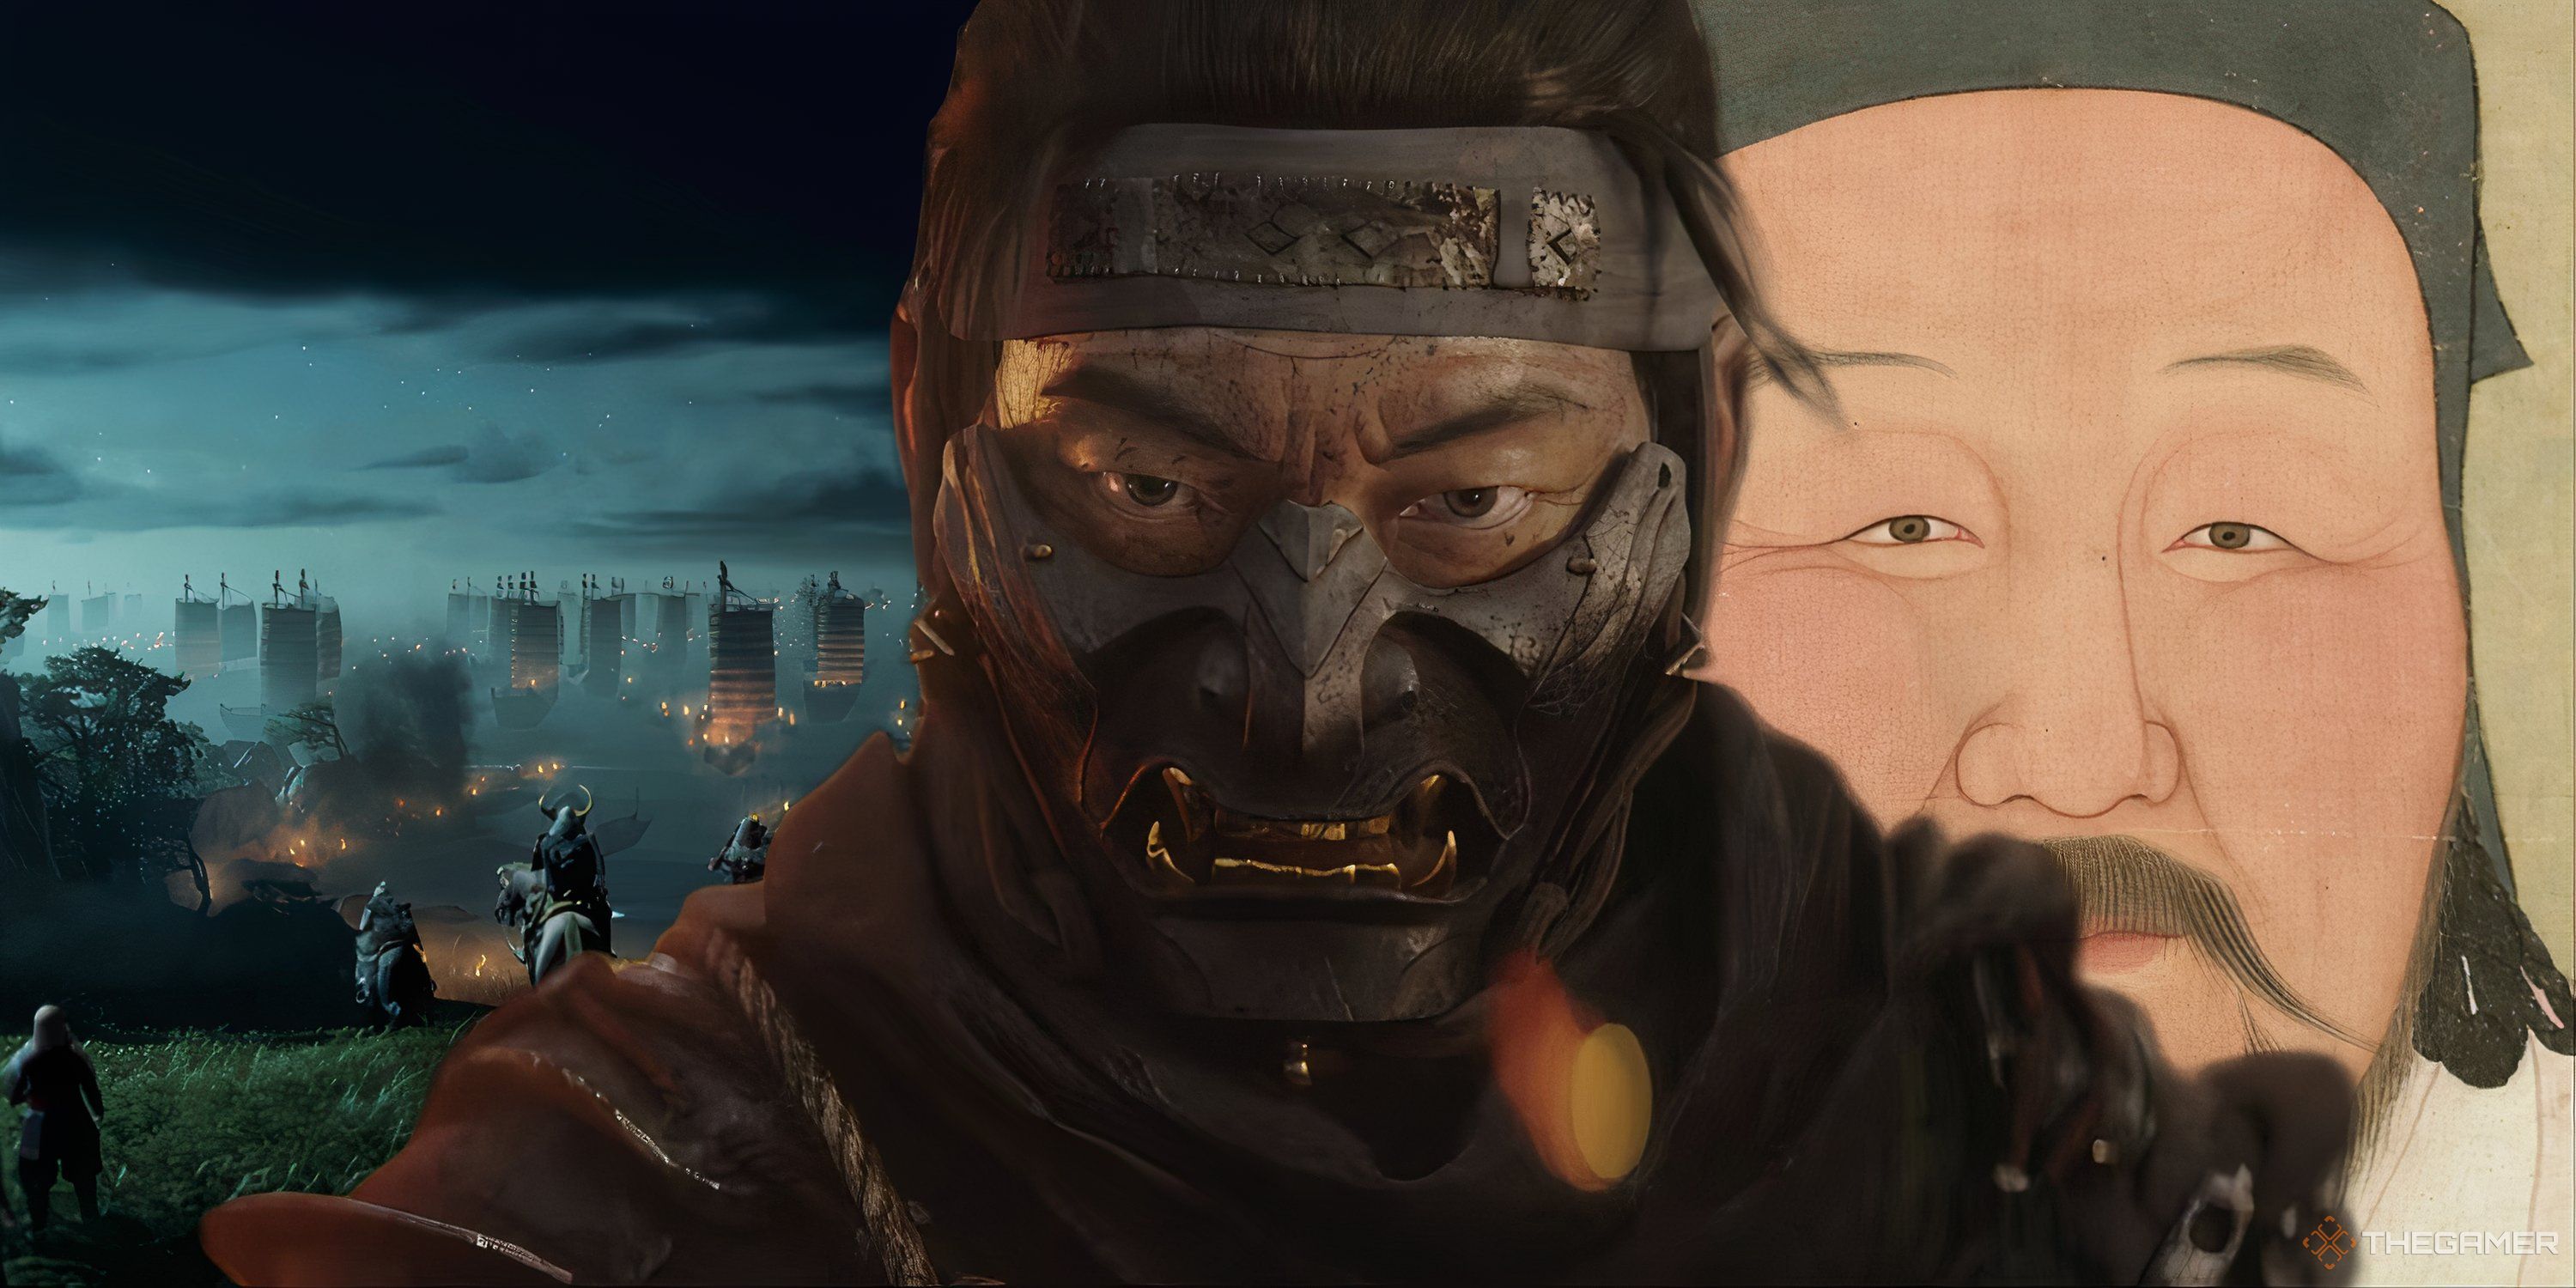 Close-up of protagonist Jin Sakai in a mask with a portrait of Kublai and the opening invasion battle at the beach.